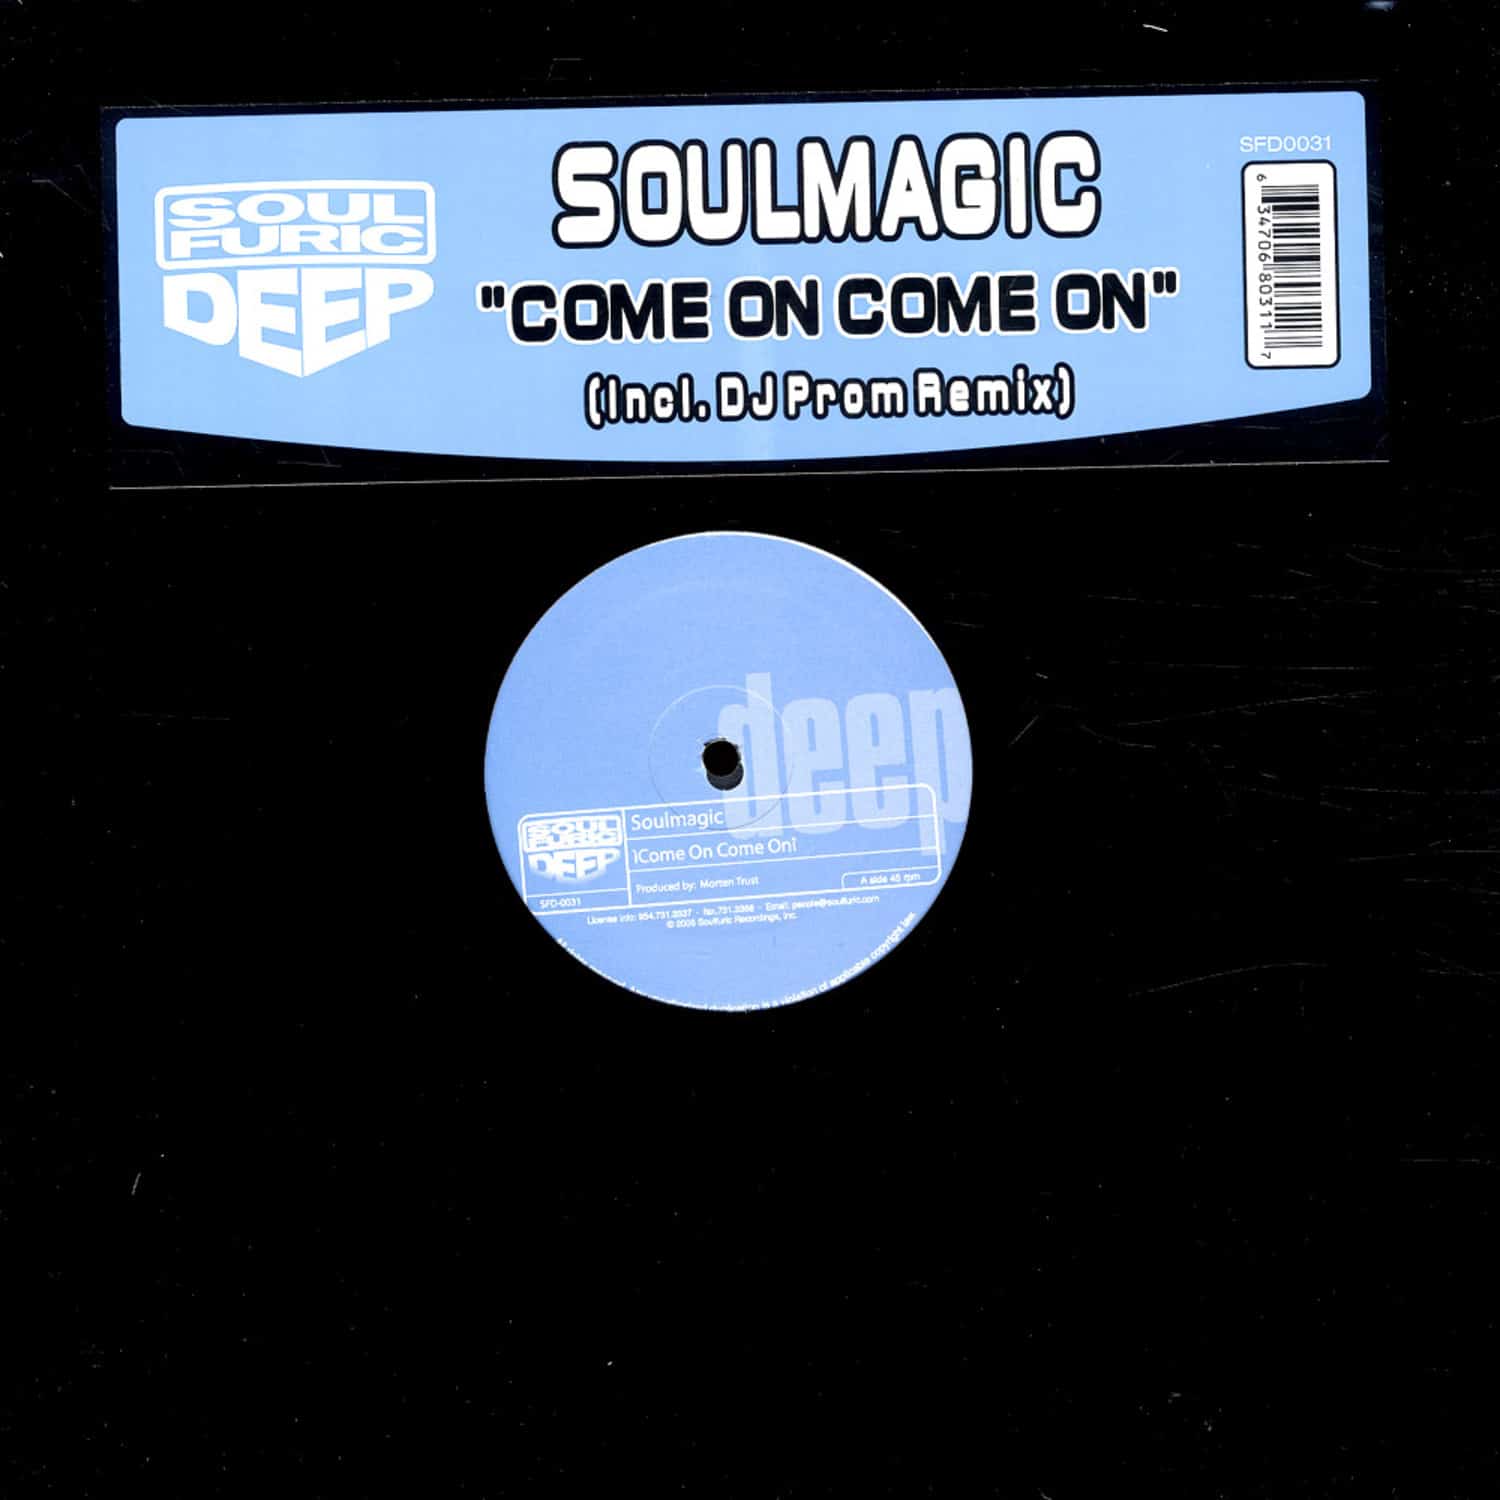 Soulmagic - COME ON COME ON